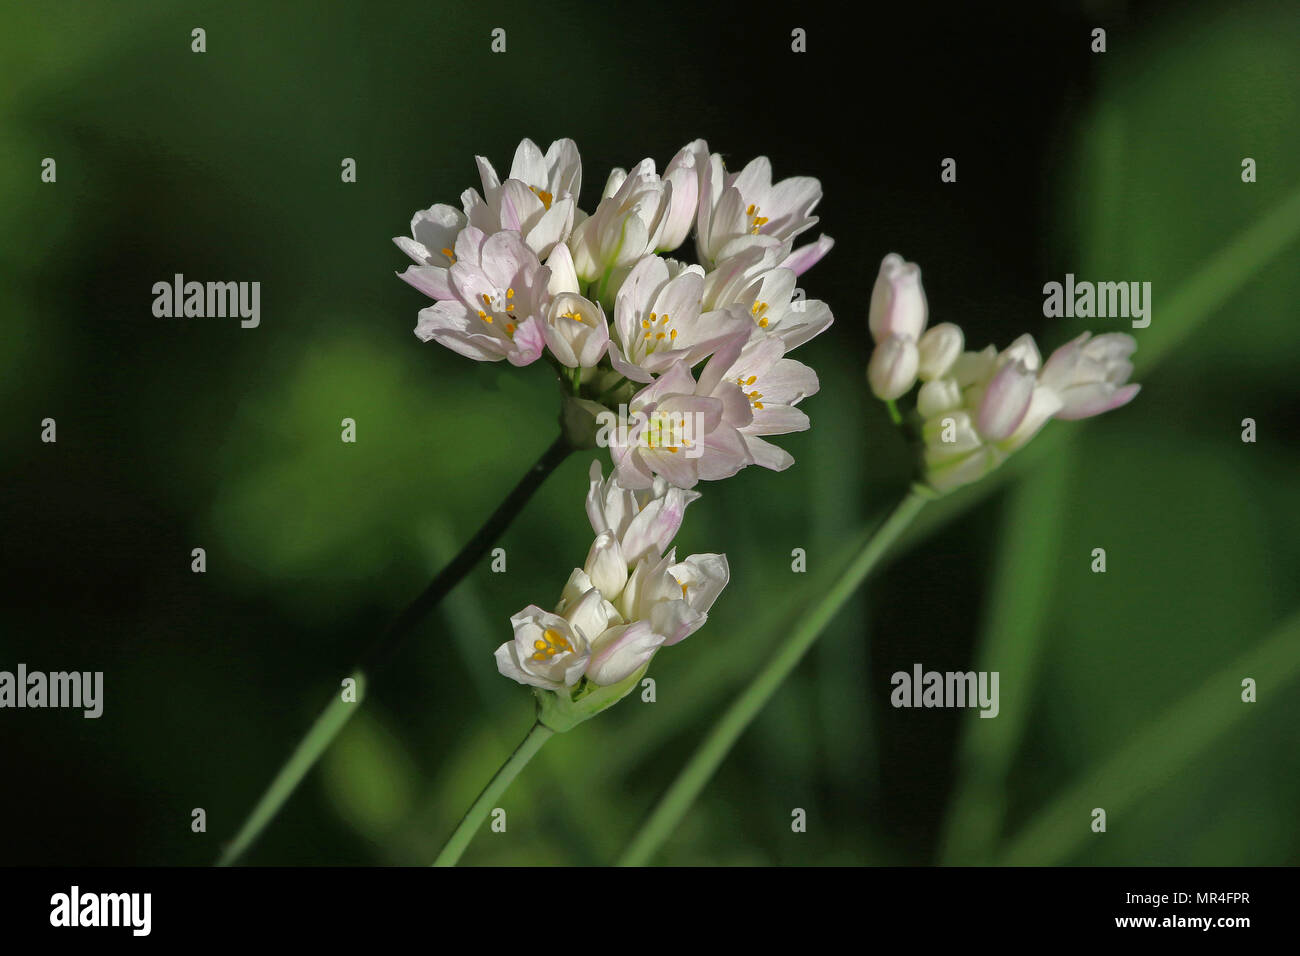 rosy garlic growing wild Latin name allium roseum in the hedgerows in central Italy in spring Stock Photo